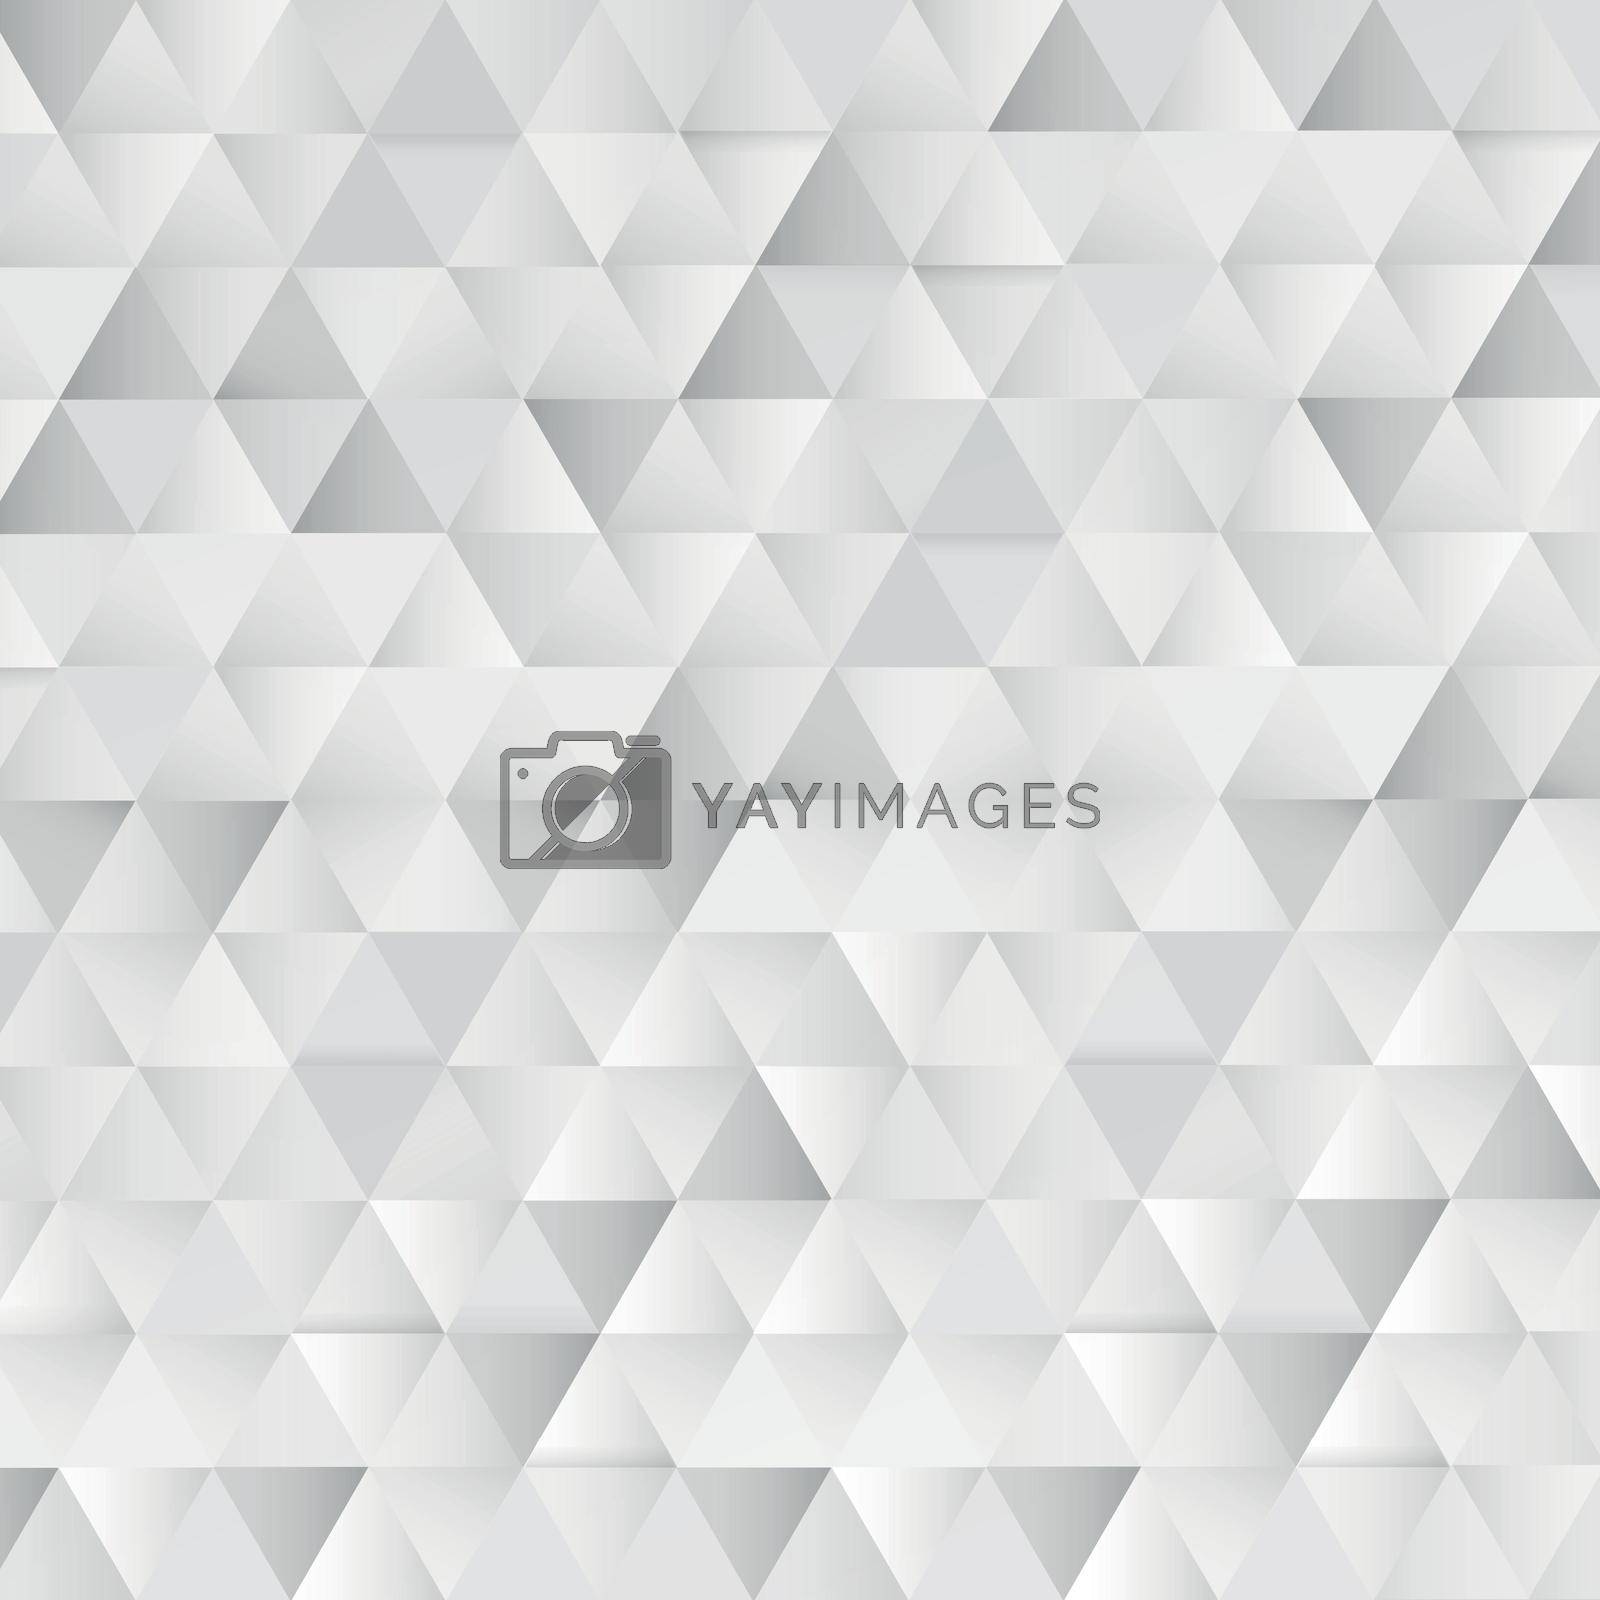 Abstract white - gray background texture with many triangles - Vector illustration